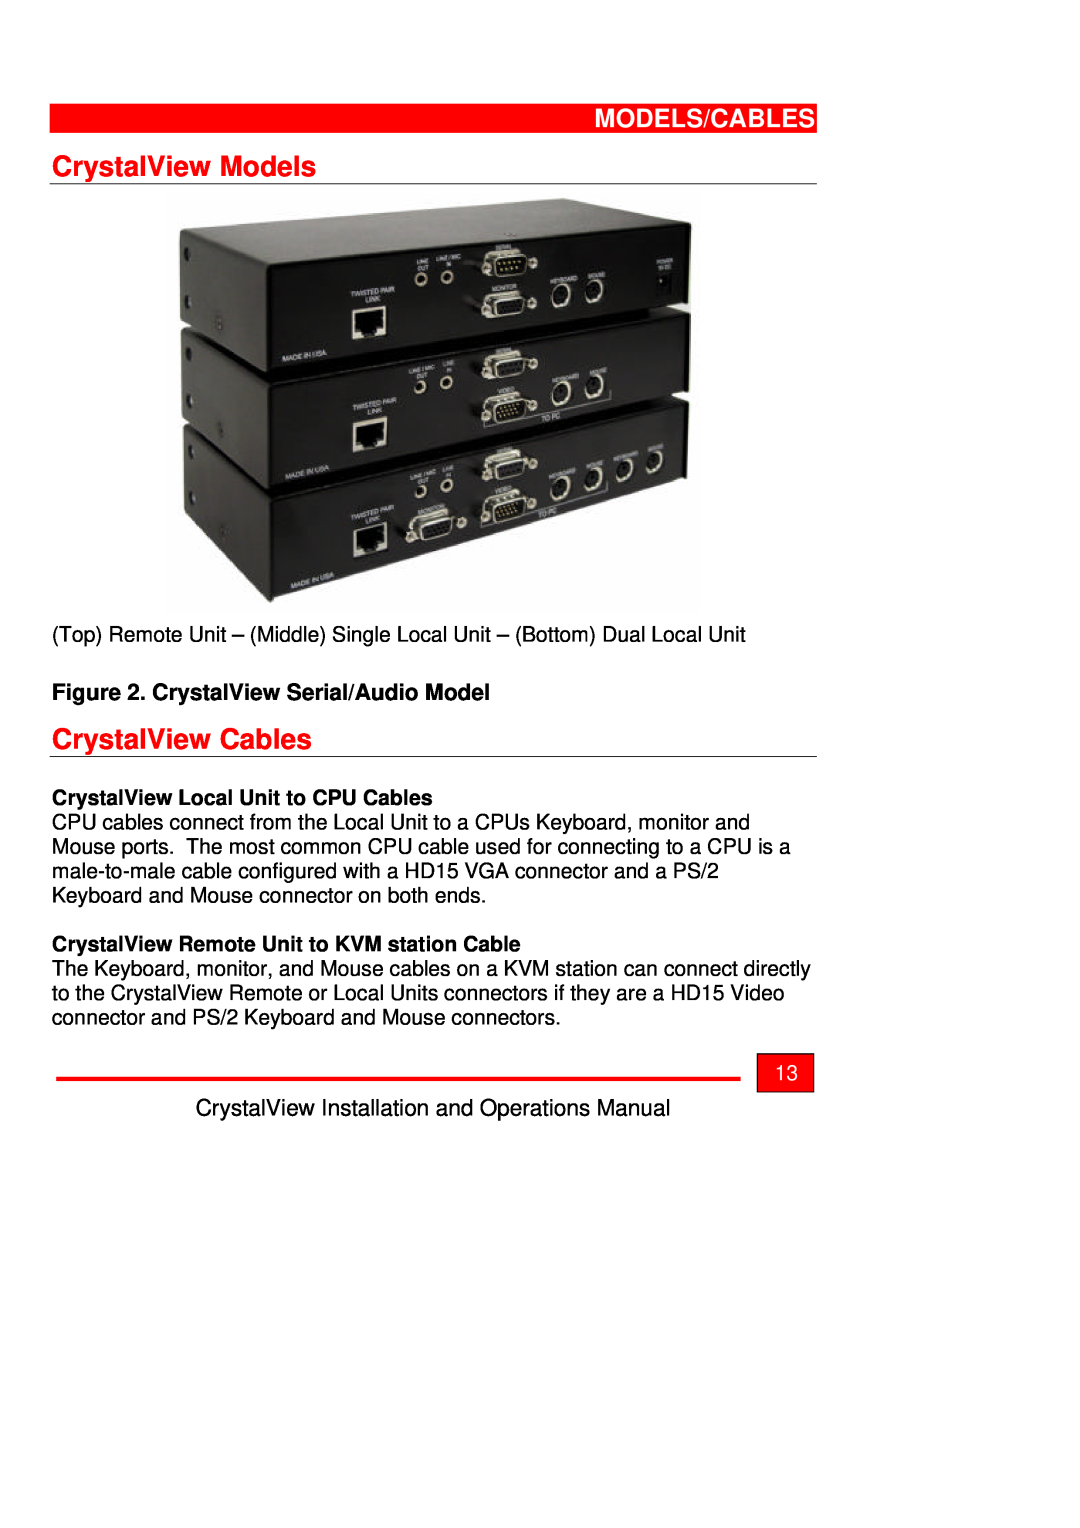 Rose electronic Crystal View CrystalView Models, CrystalView Cables, Models/Cables, CrystalView Serial/Audio Model 